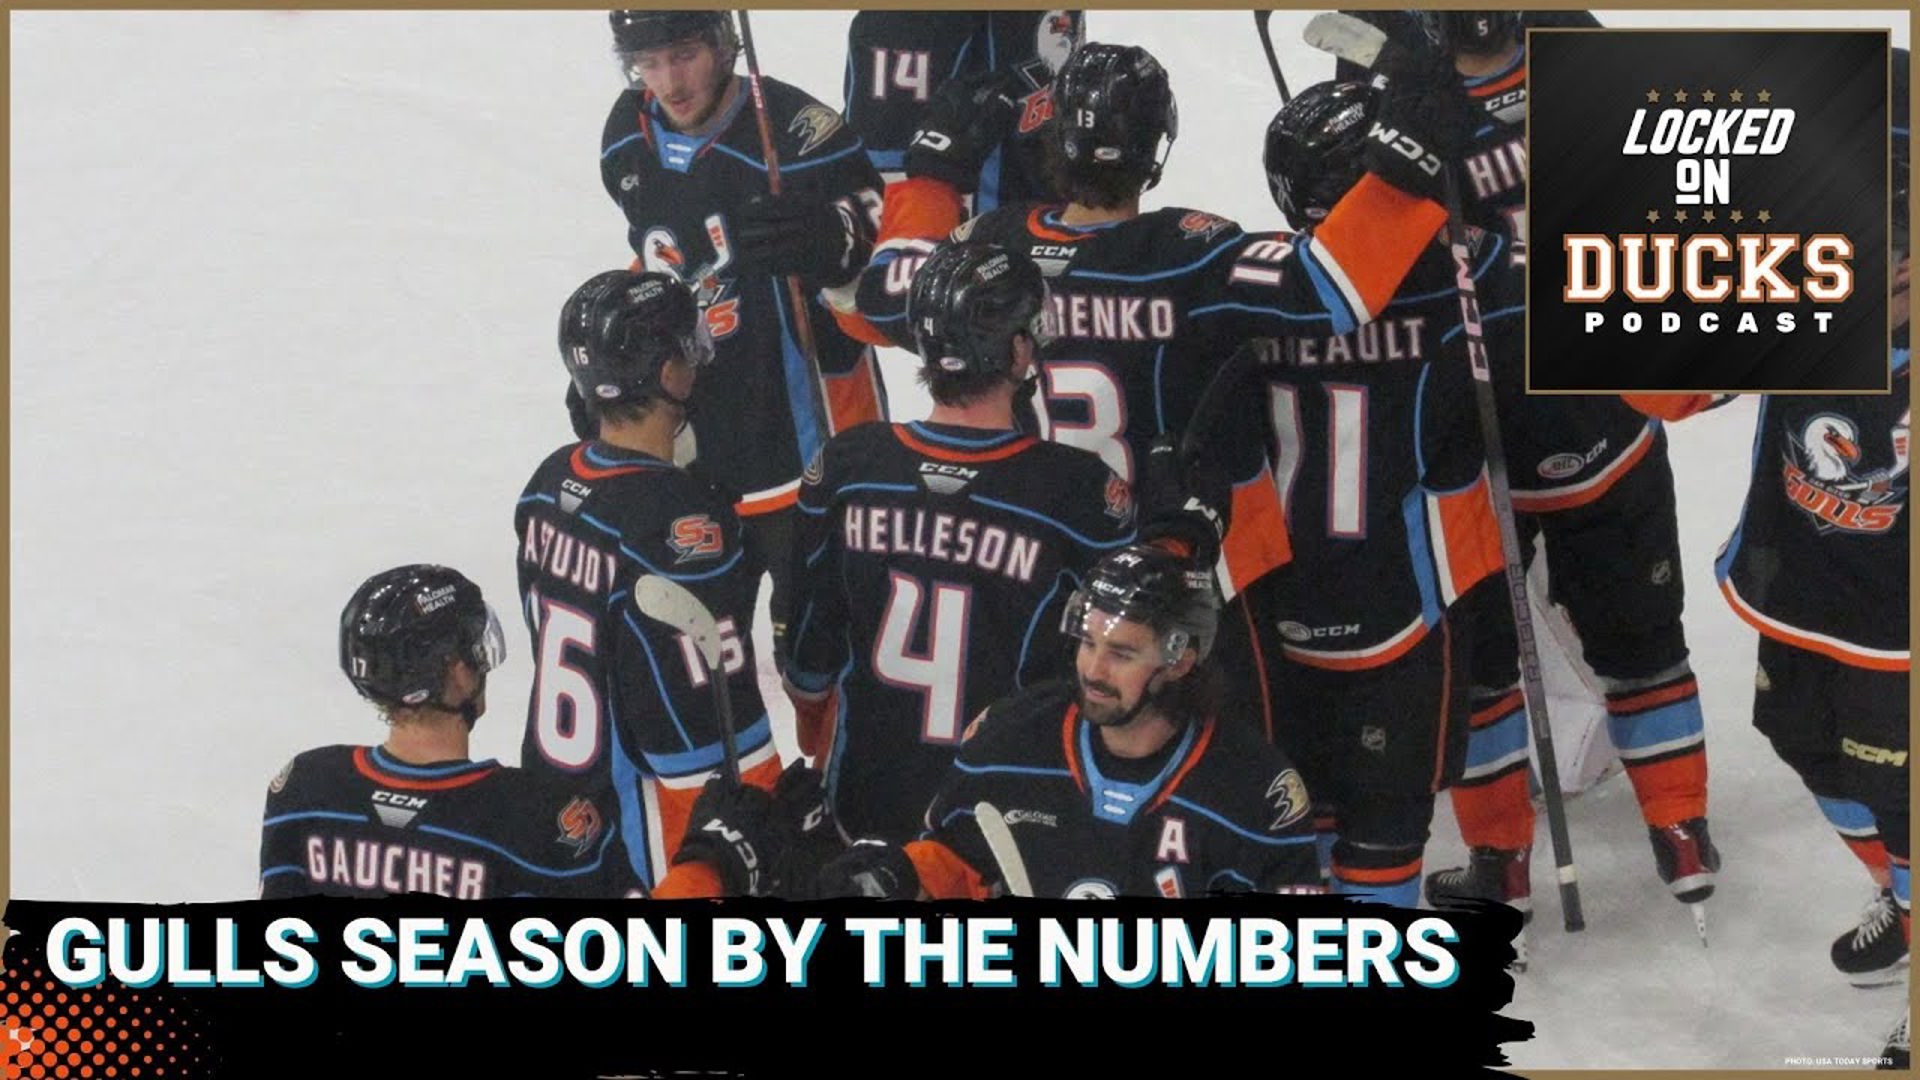 While the San Diego Gulls didn't have as much success as they would have hoped, there was still some significant improvements compared to the previous season.